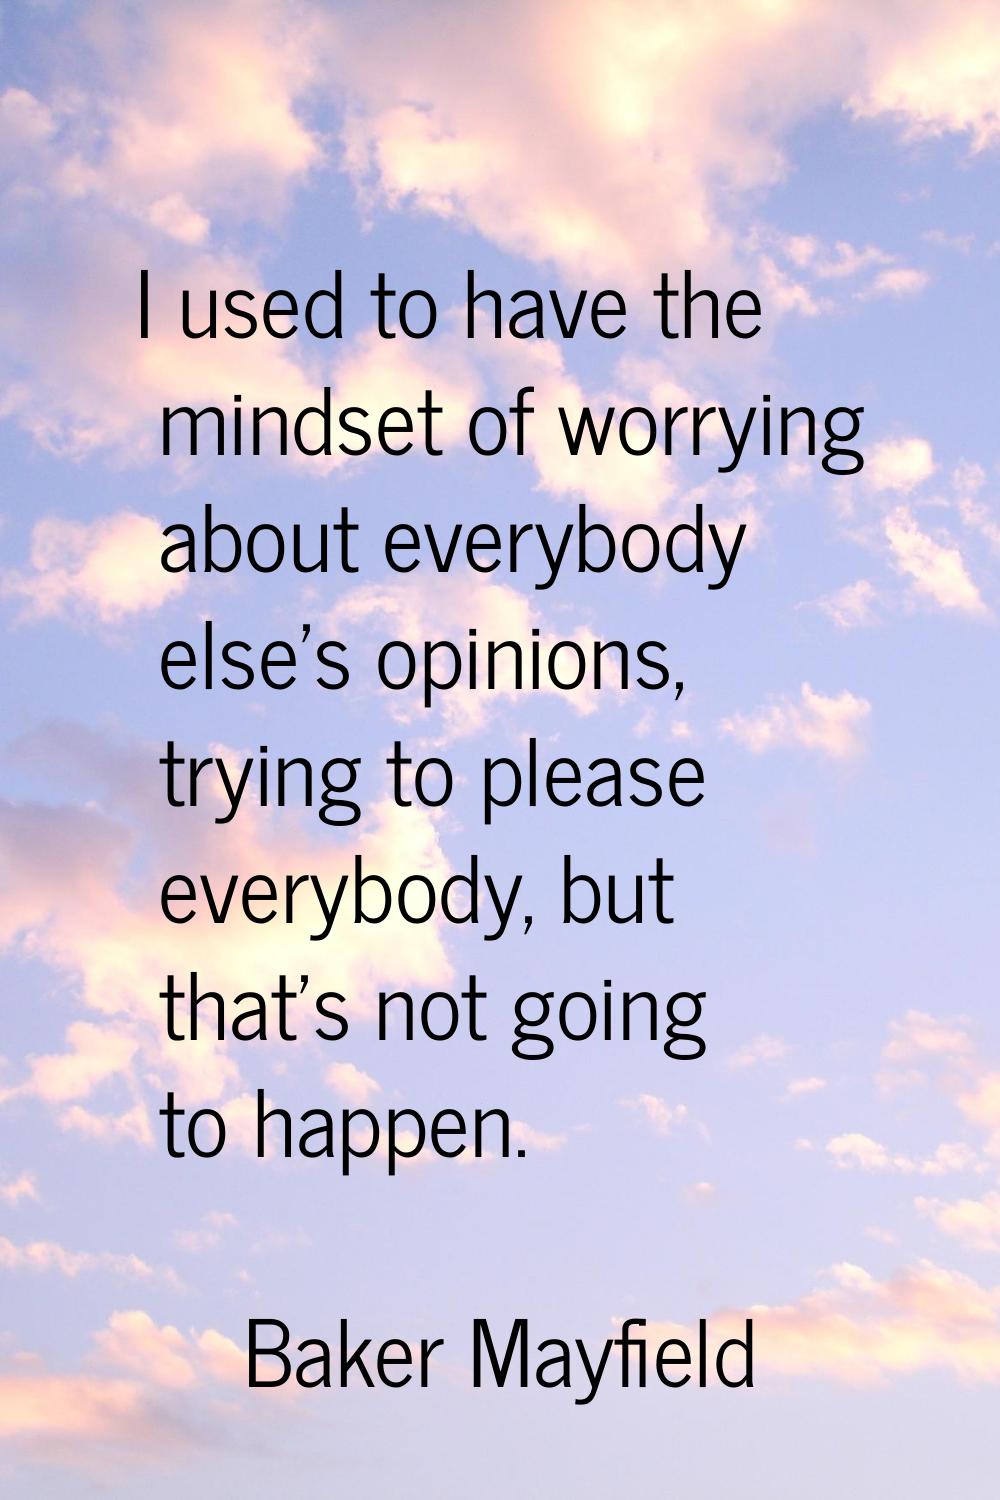 I used to have the mindset of worrying about everybody else's opinions, trying to please everybody,